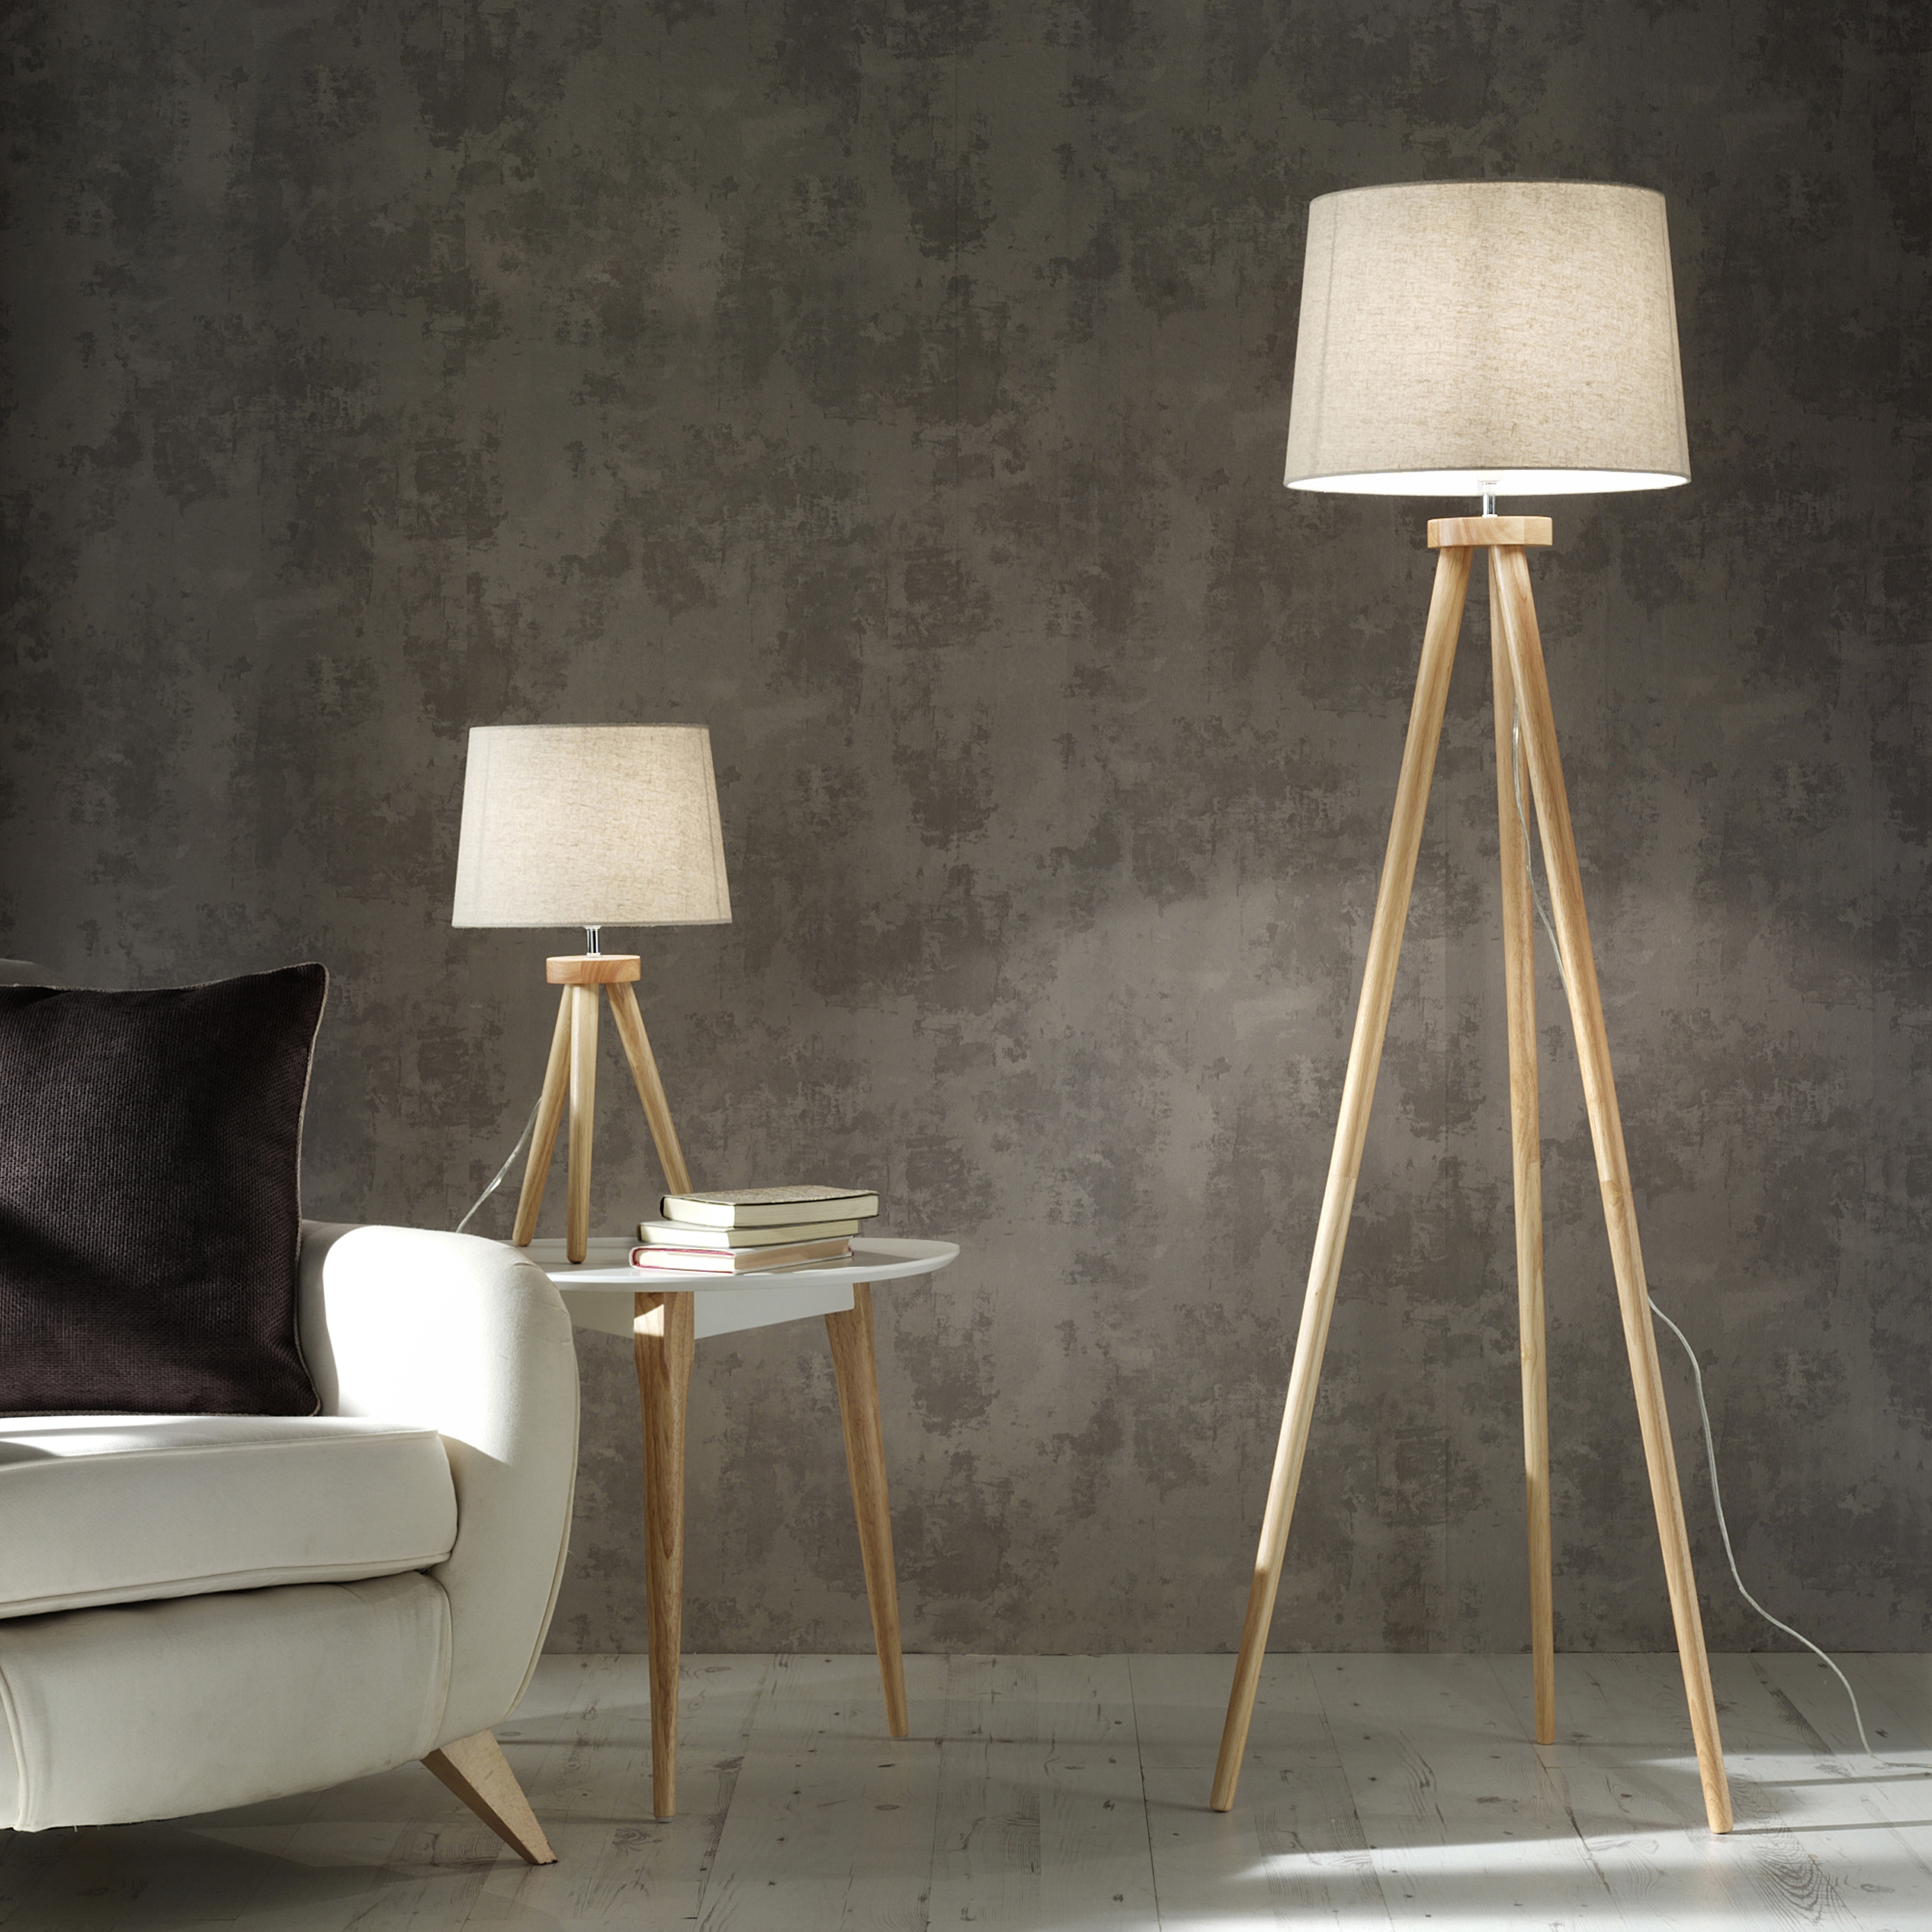 Chadwick Tripod Table and Floor Lamp in a Natural Wood Colour With Lamp